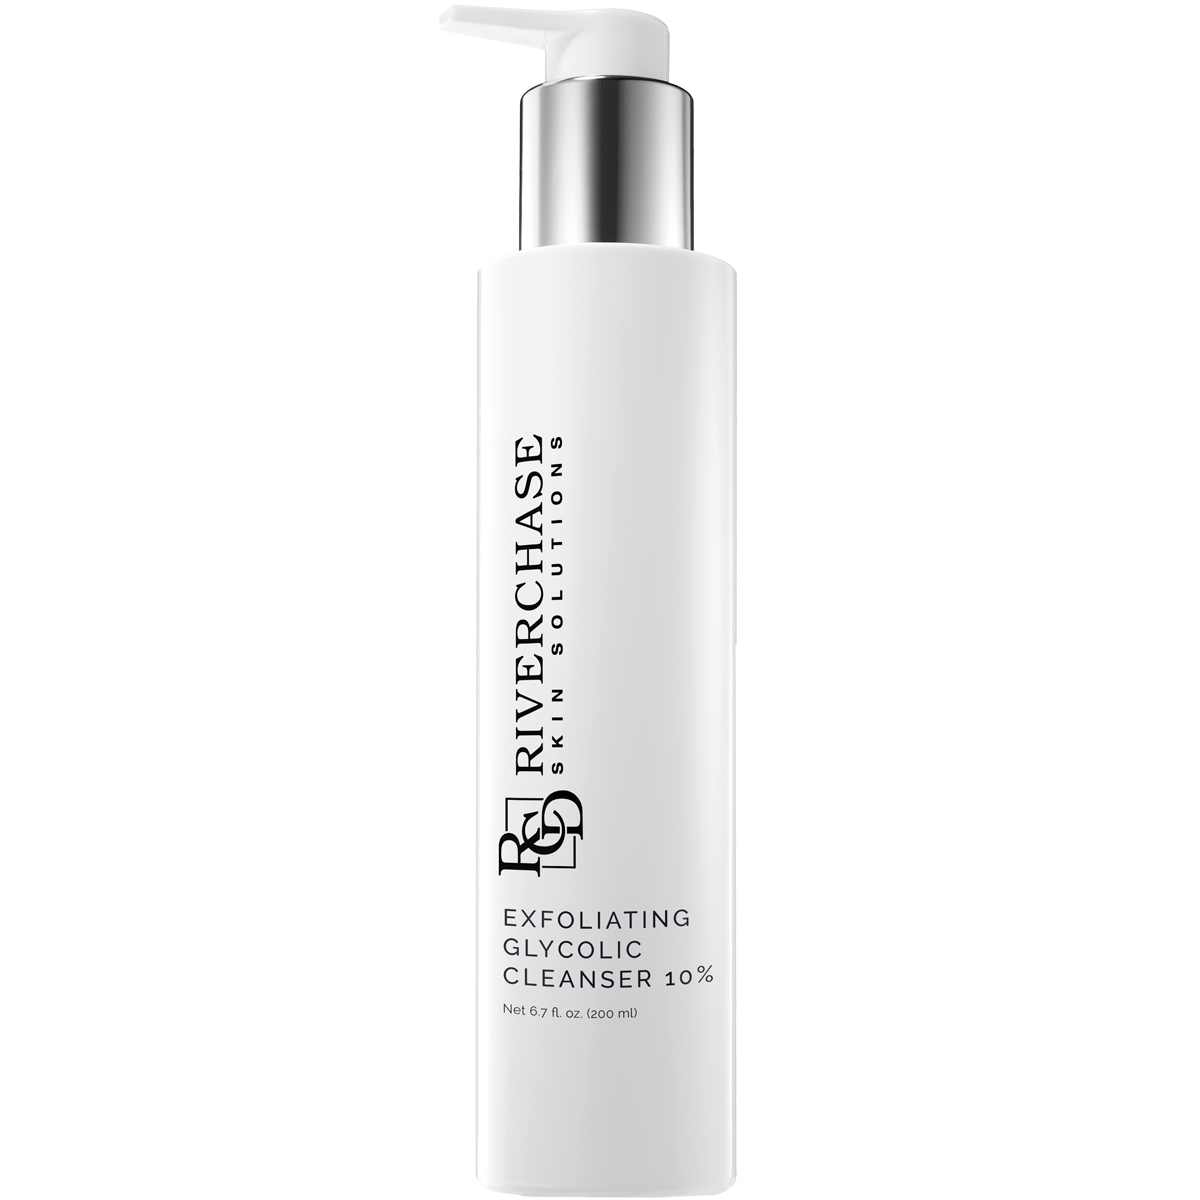 Exfoliating Glycolic Cleanser 10%